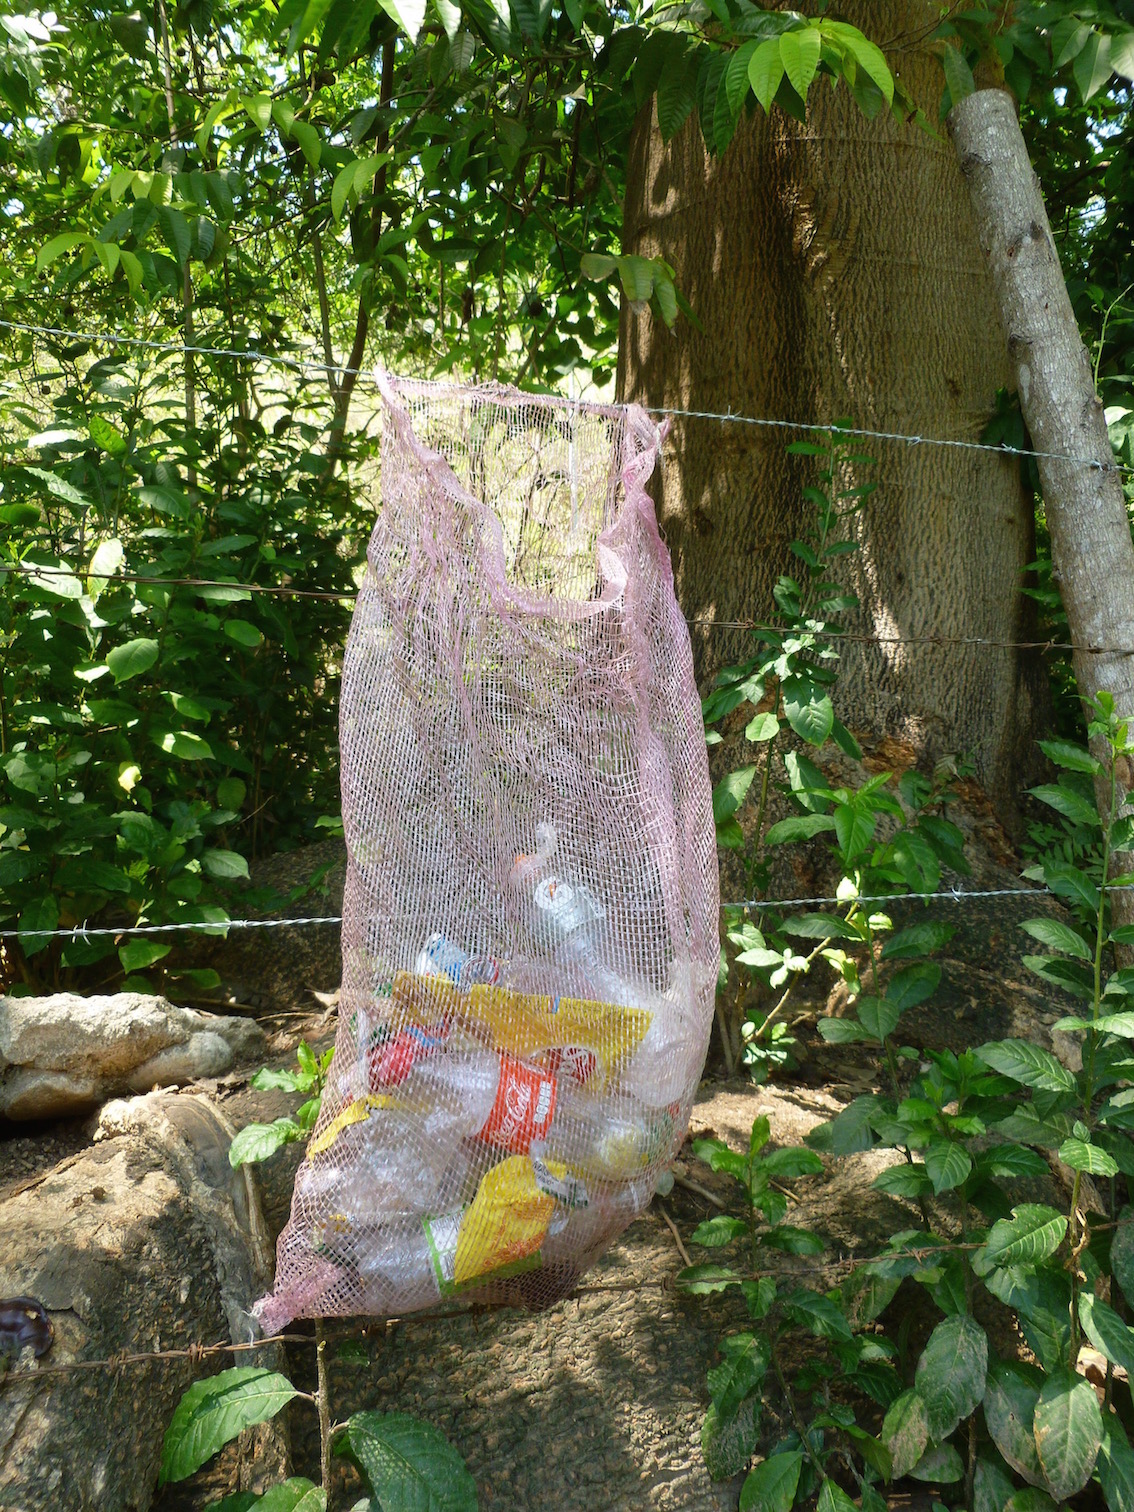 In another location walking out of the beautiful coastal town of Yelapa, litter dutifully goes into bags along the track, but litter reappears by the riverside once into the countryside where the collection bags run out. 